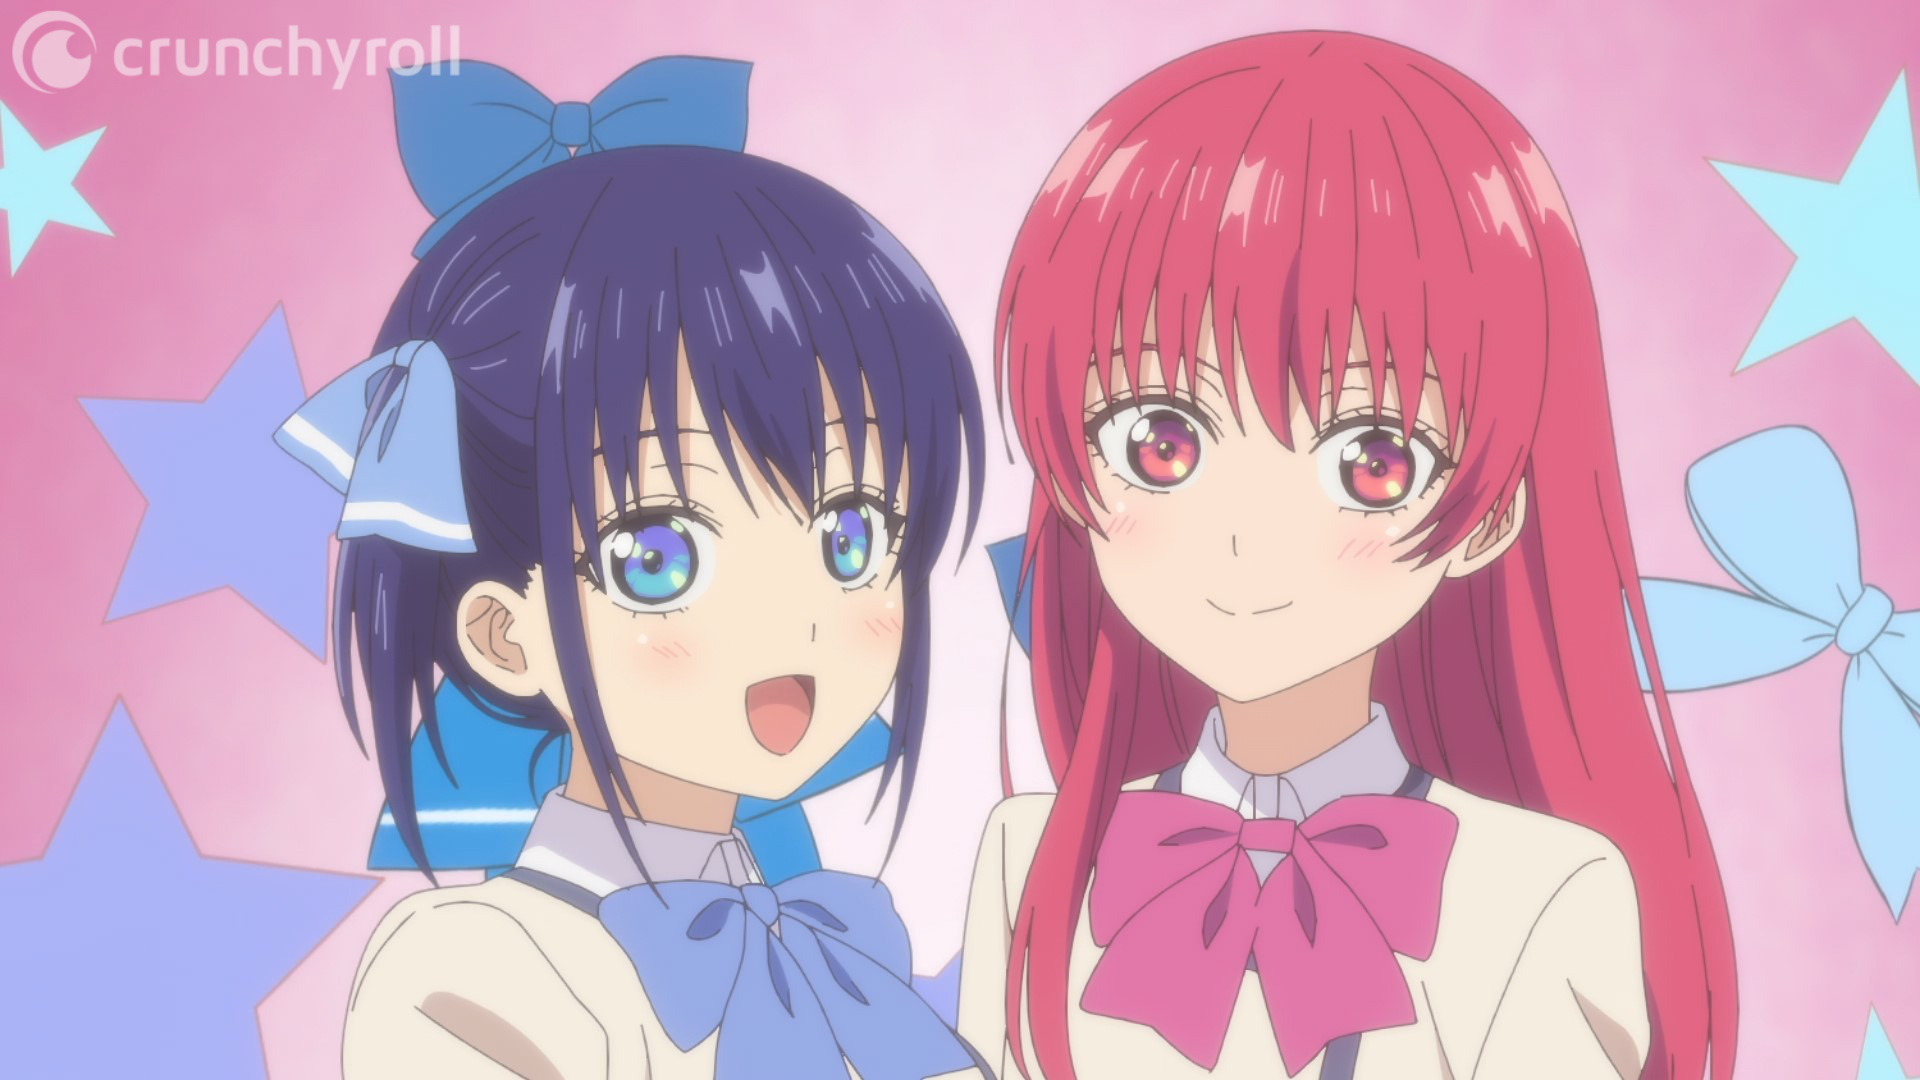 Crunchyroll - Girlfriend, Girlfriend TV Anime Goes for Another with Season 2  Announcement